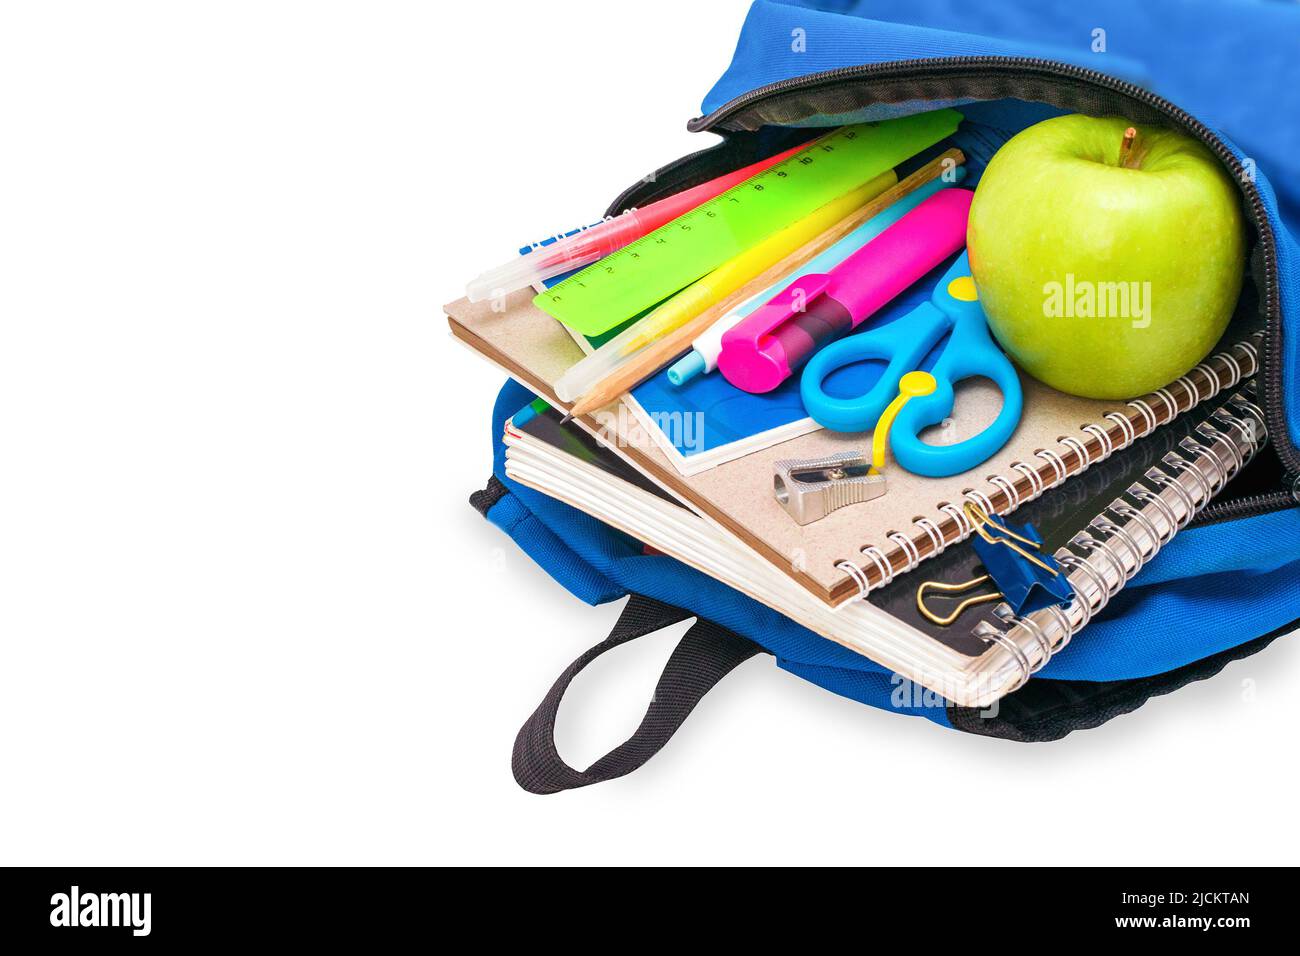 The students blue open schoolbag is filled with notebooks, pens, markers, stationery and a green apple lies on its side, isolated on white background. Stock Photo